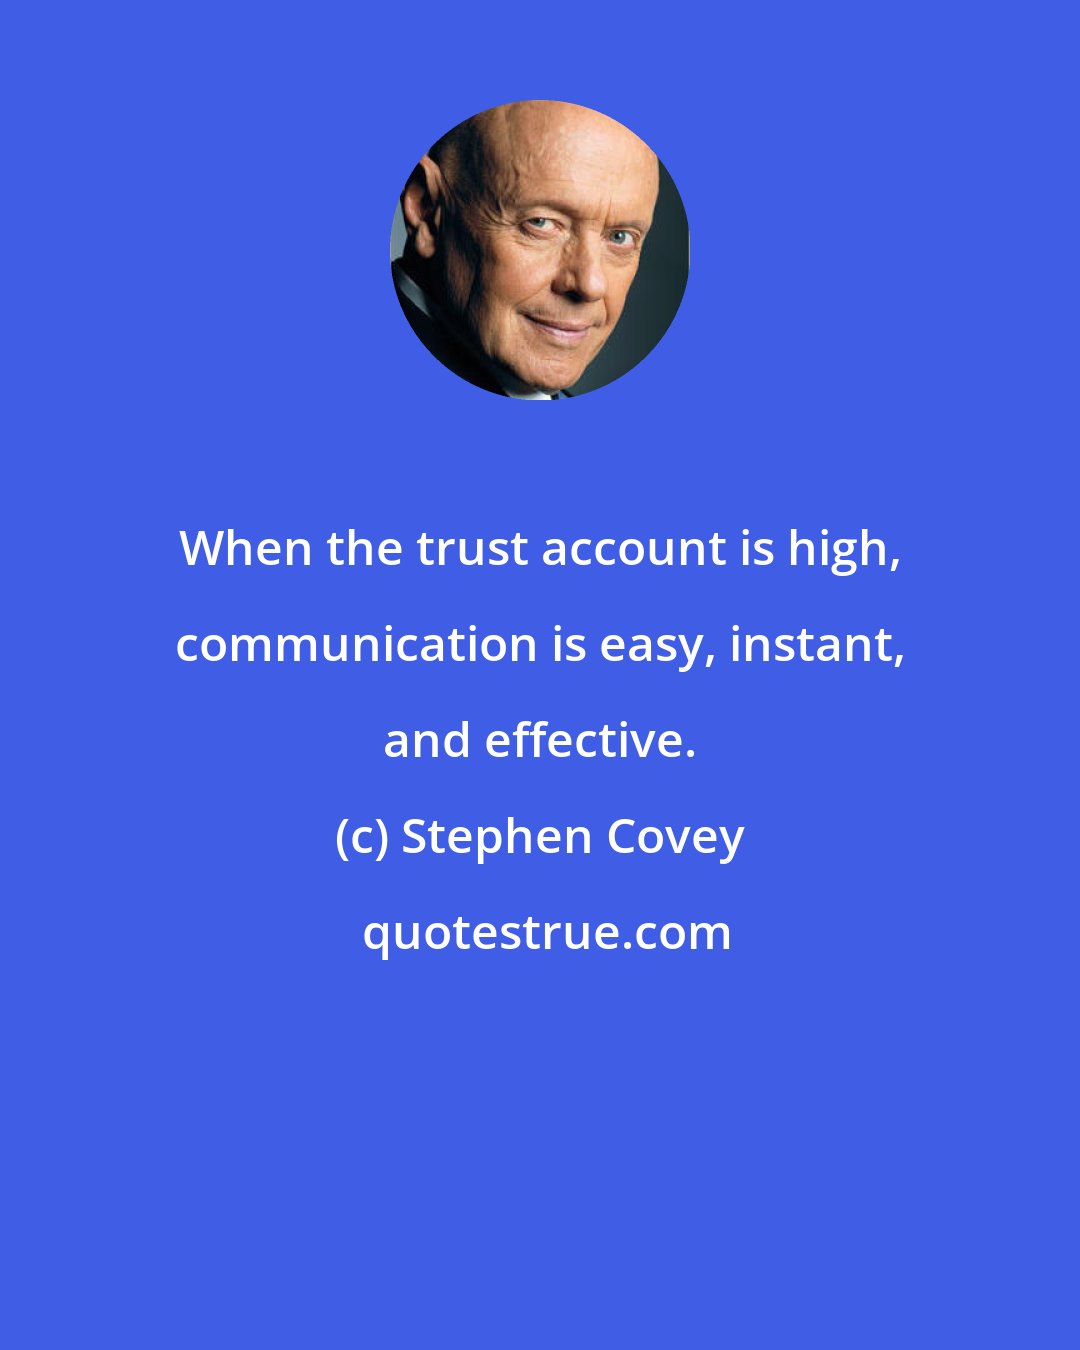 Stephen Covey: When the trust account is high, communication is easy, instant, and effective.